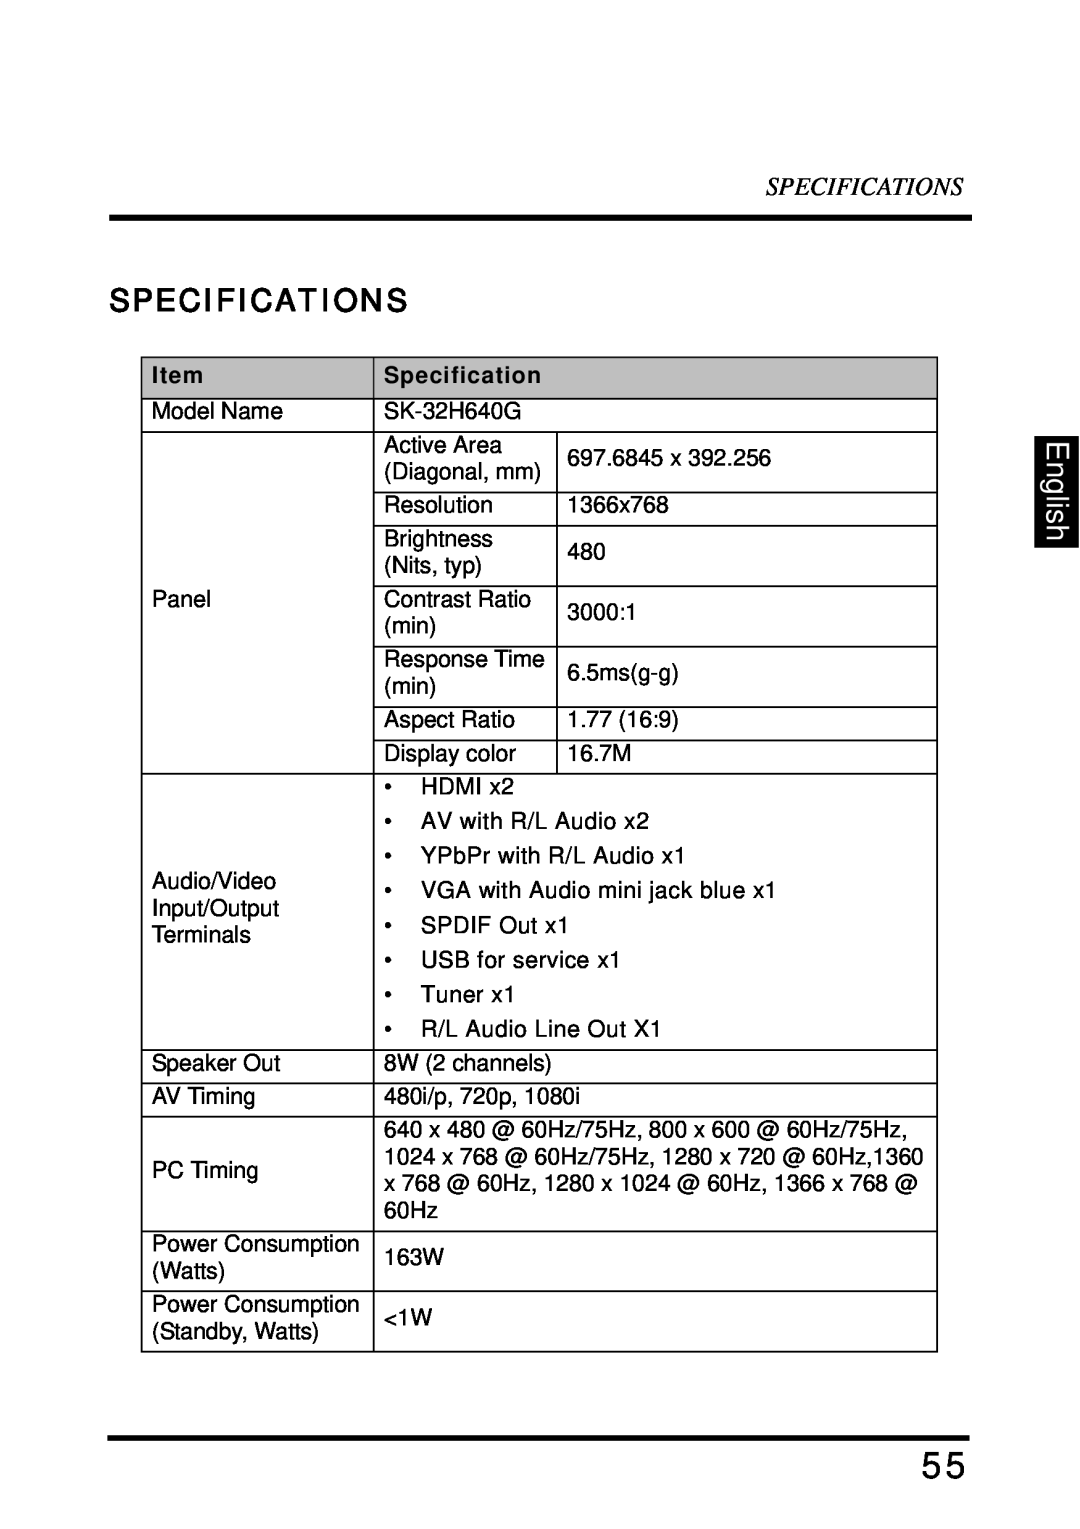 Westinghouse SK-32H640G user manual Specifications, English 